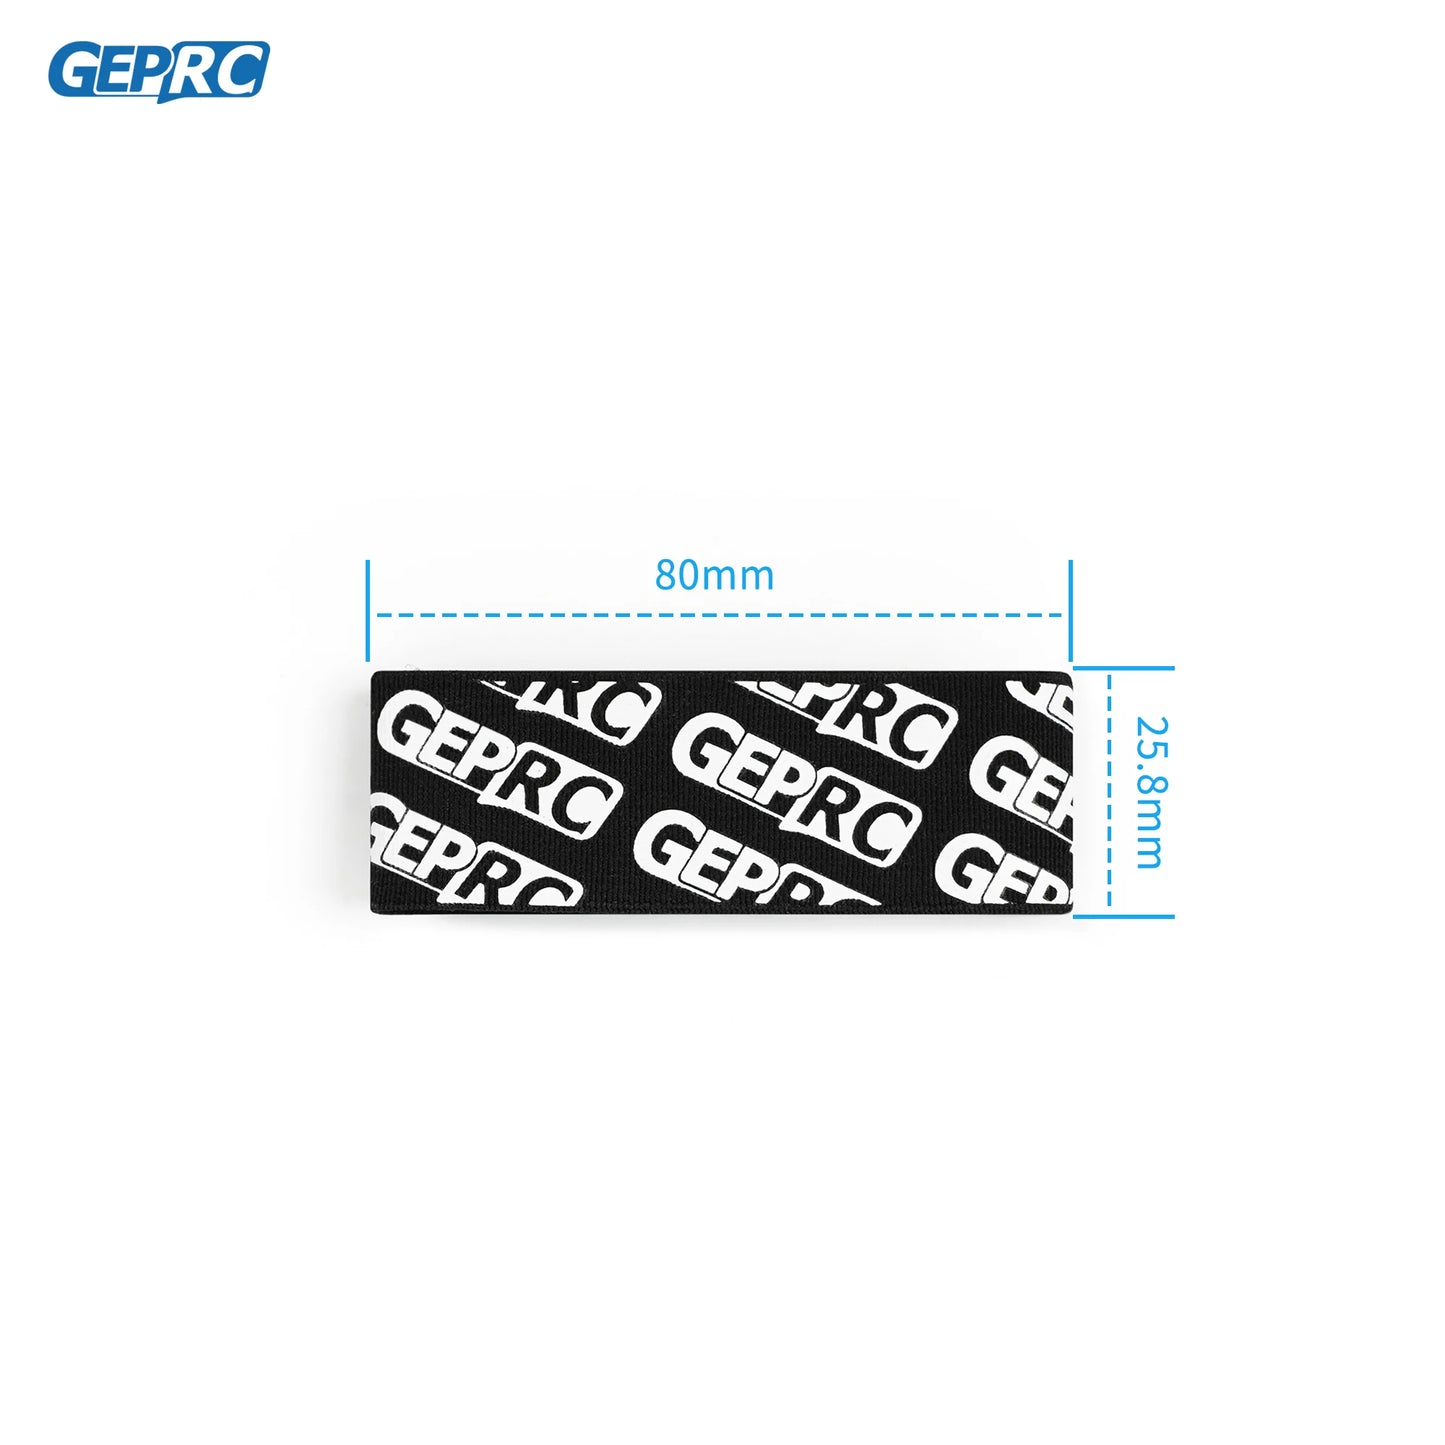 GEPRC GEP-RACER 5 "Racer High Elastic Wristband Lacing Band 25x80mm FPV Accessories